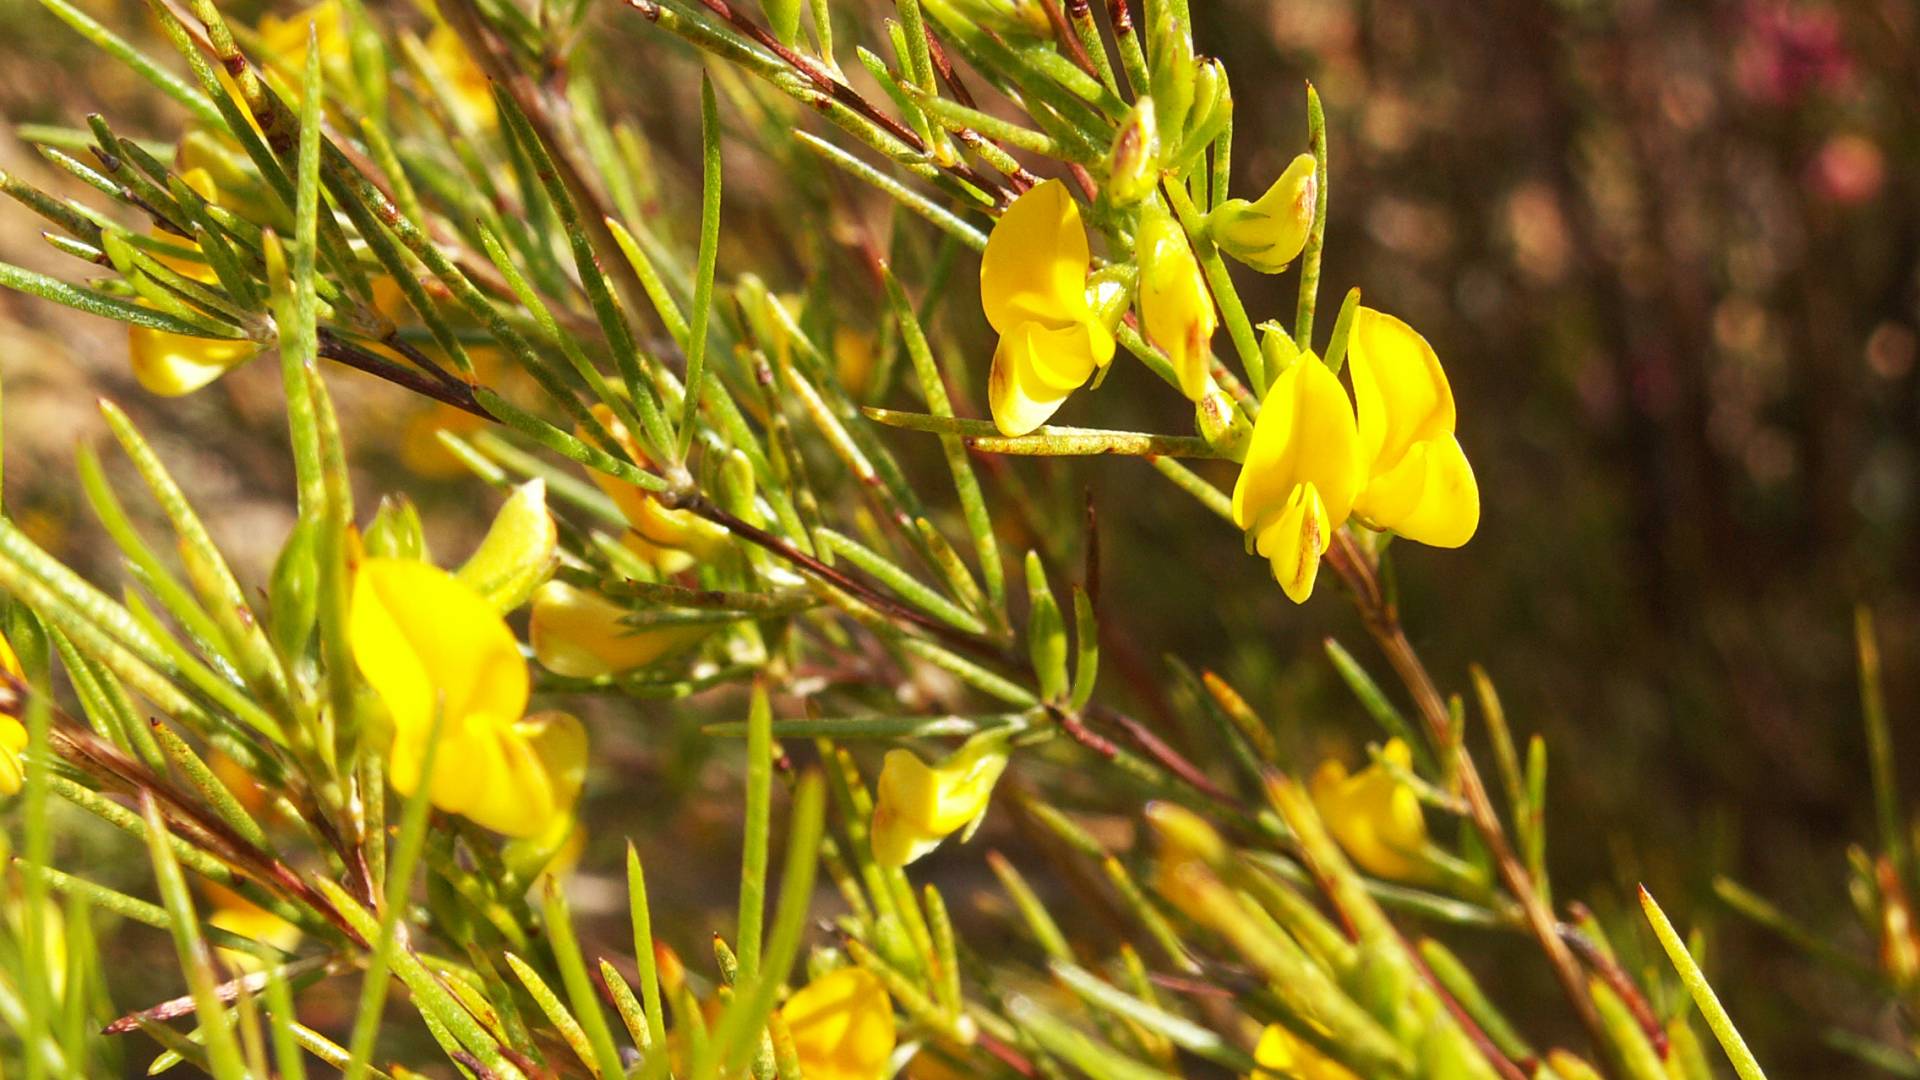 rooibos plant with yellow flowers